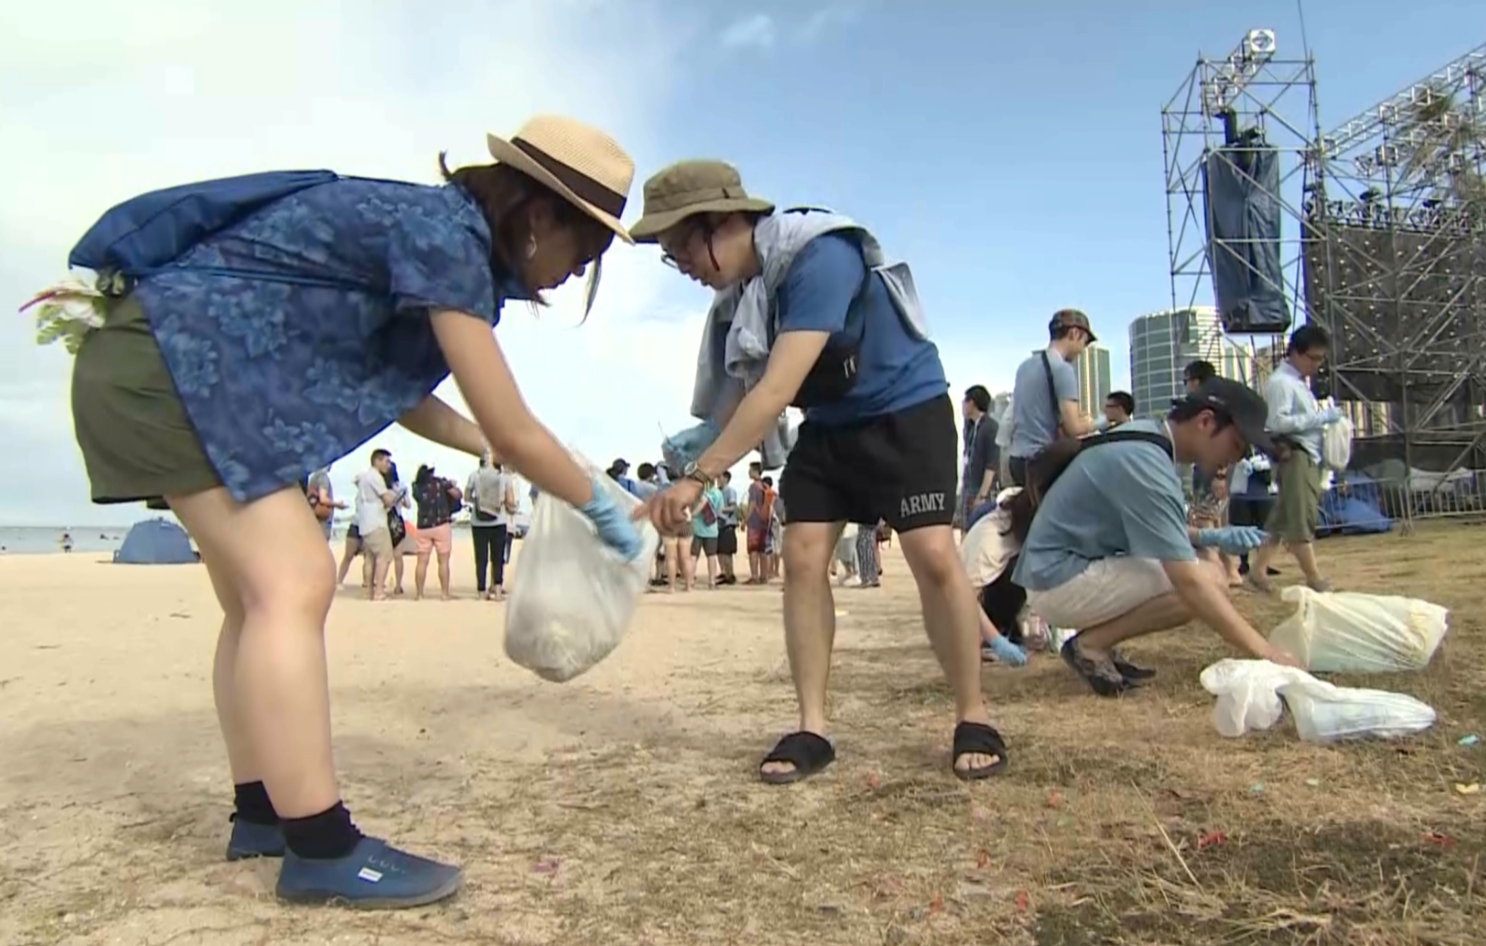 Two people wearing plastic gloves and carrying plastic bags stoop to pick up trash from the sandy ground; similarly active people are visible in the background.